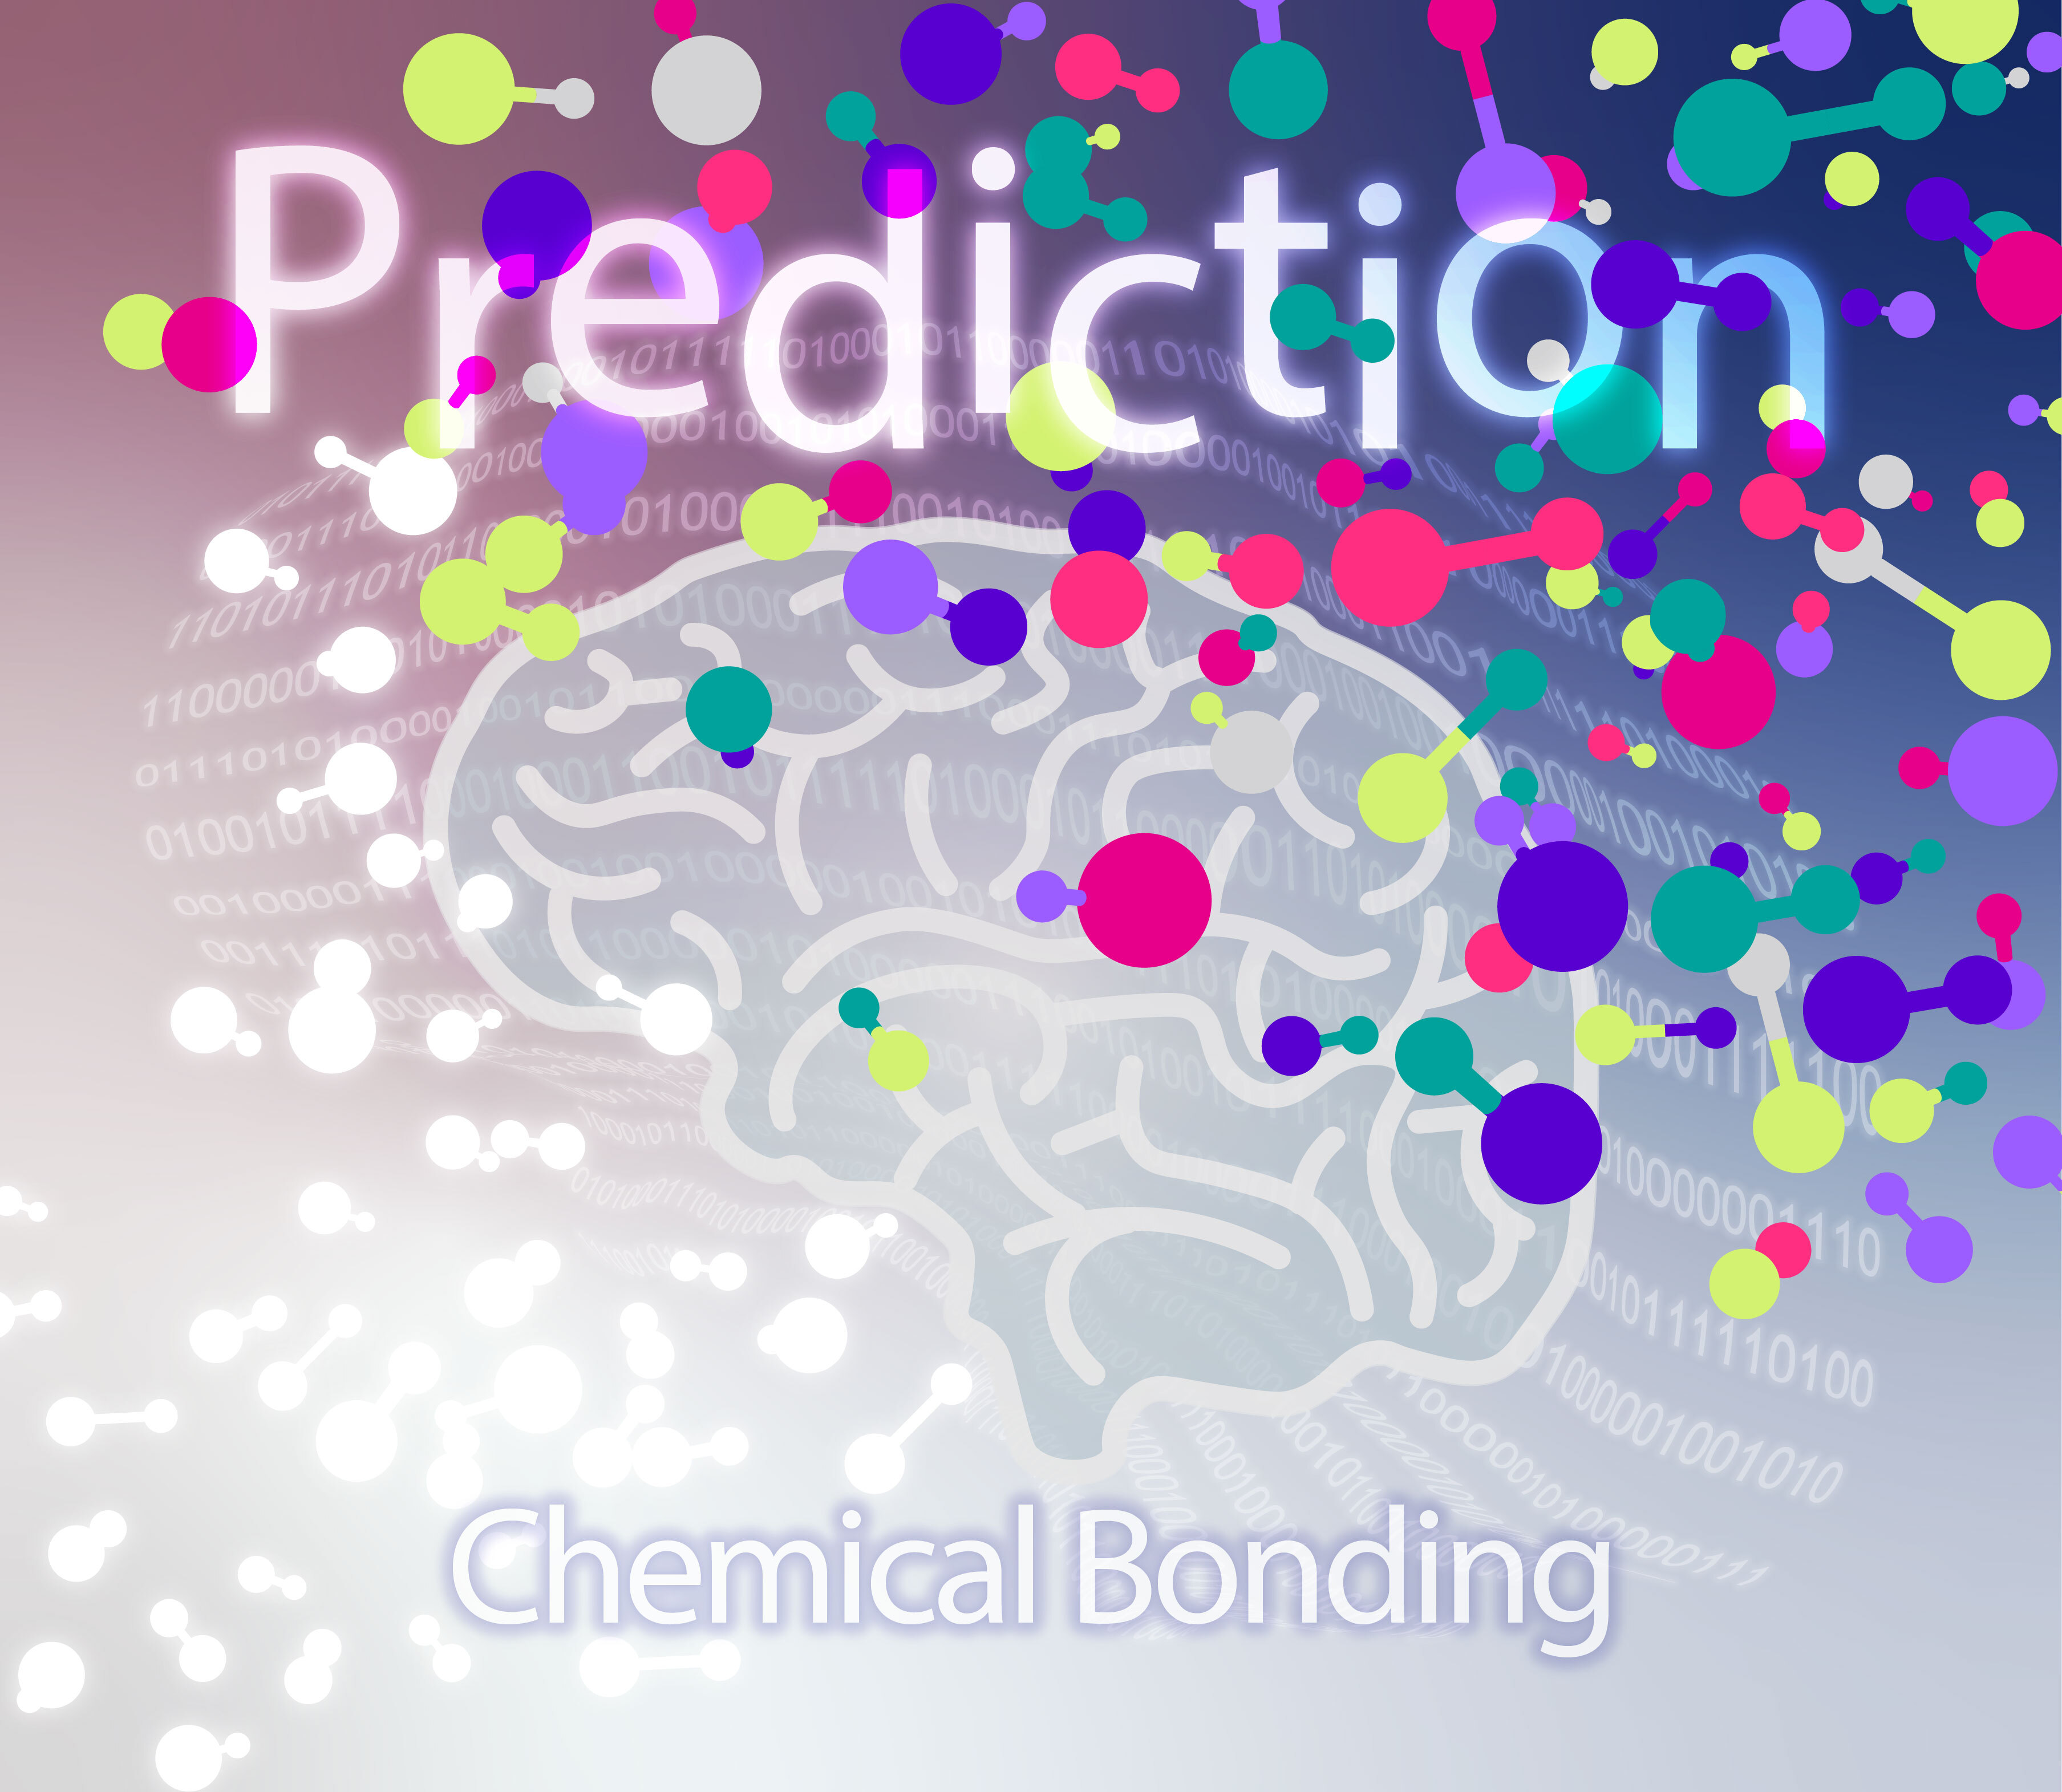 Schematic illustration of chemical bonding prediction using artificial intelligence